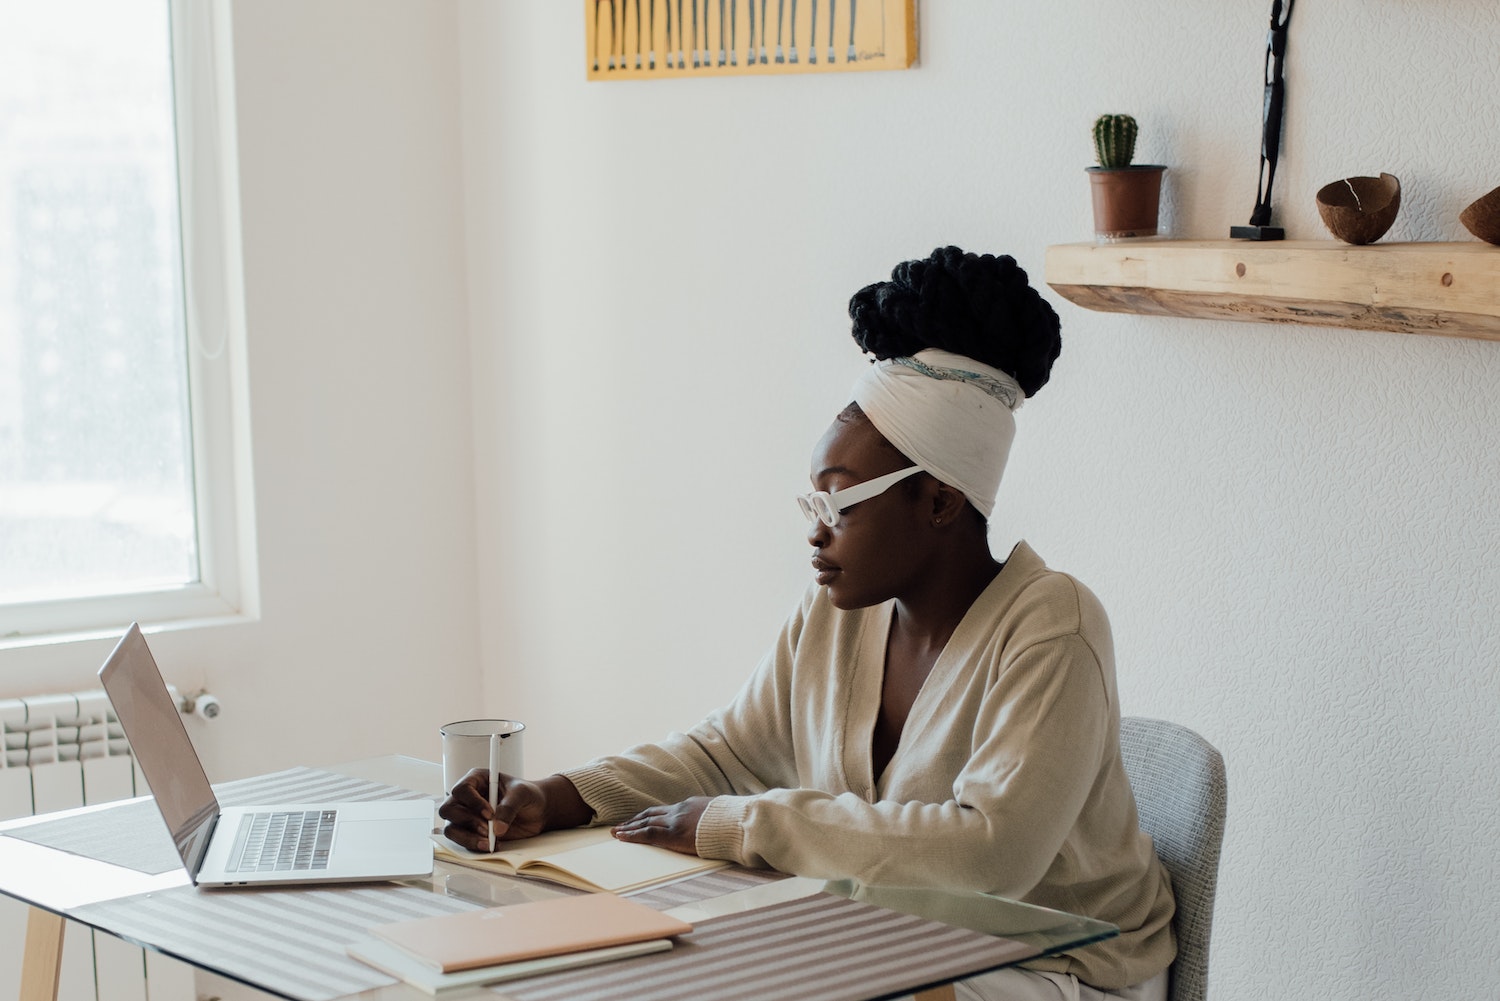 Black female solopreneur embodying all four qualities of a successful business owner